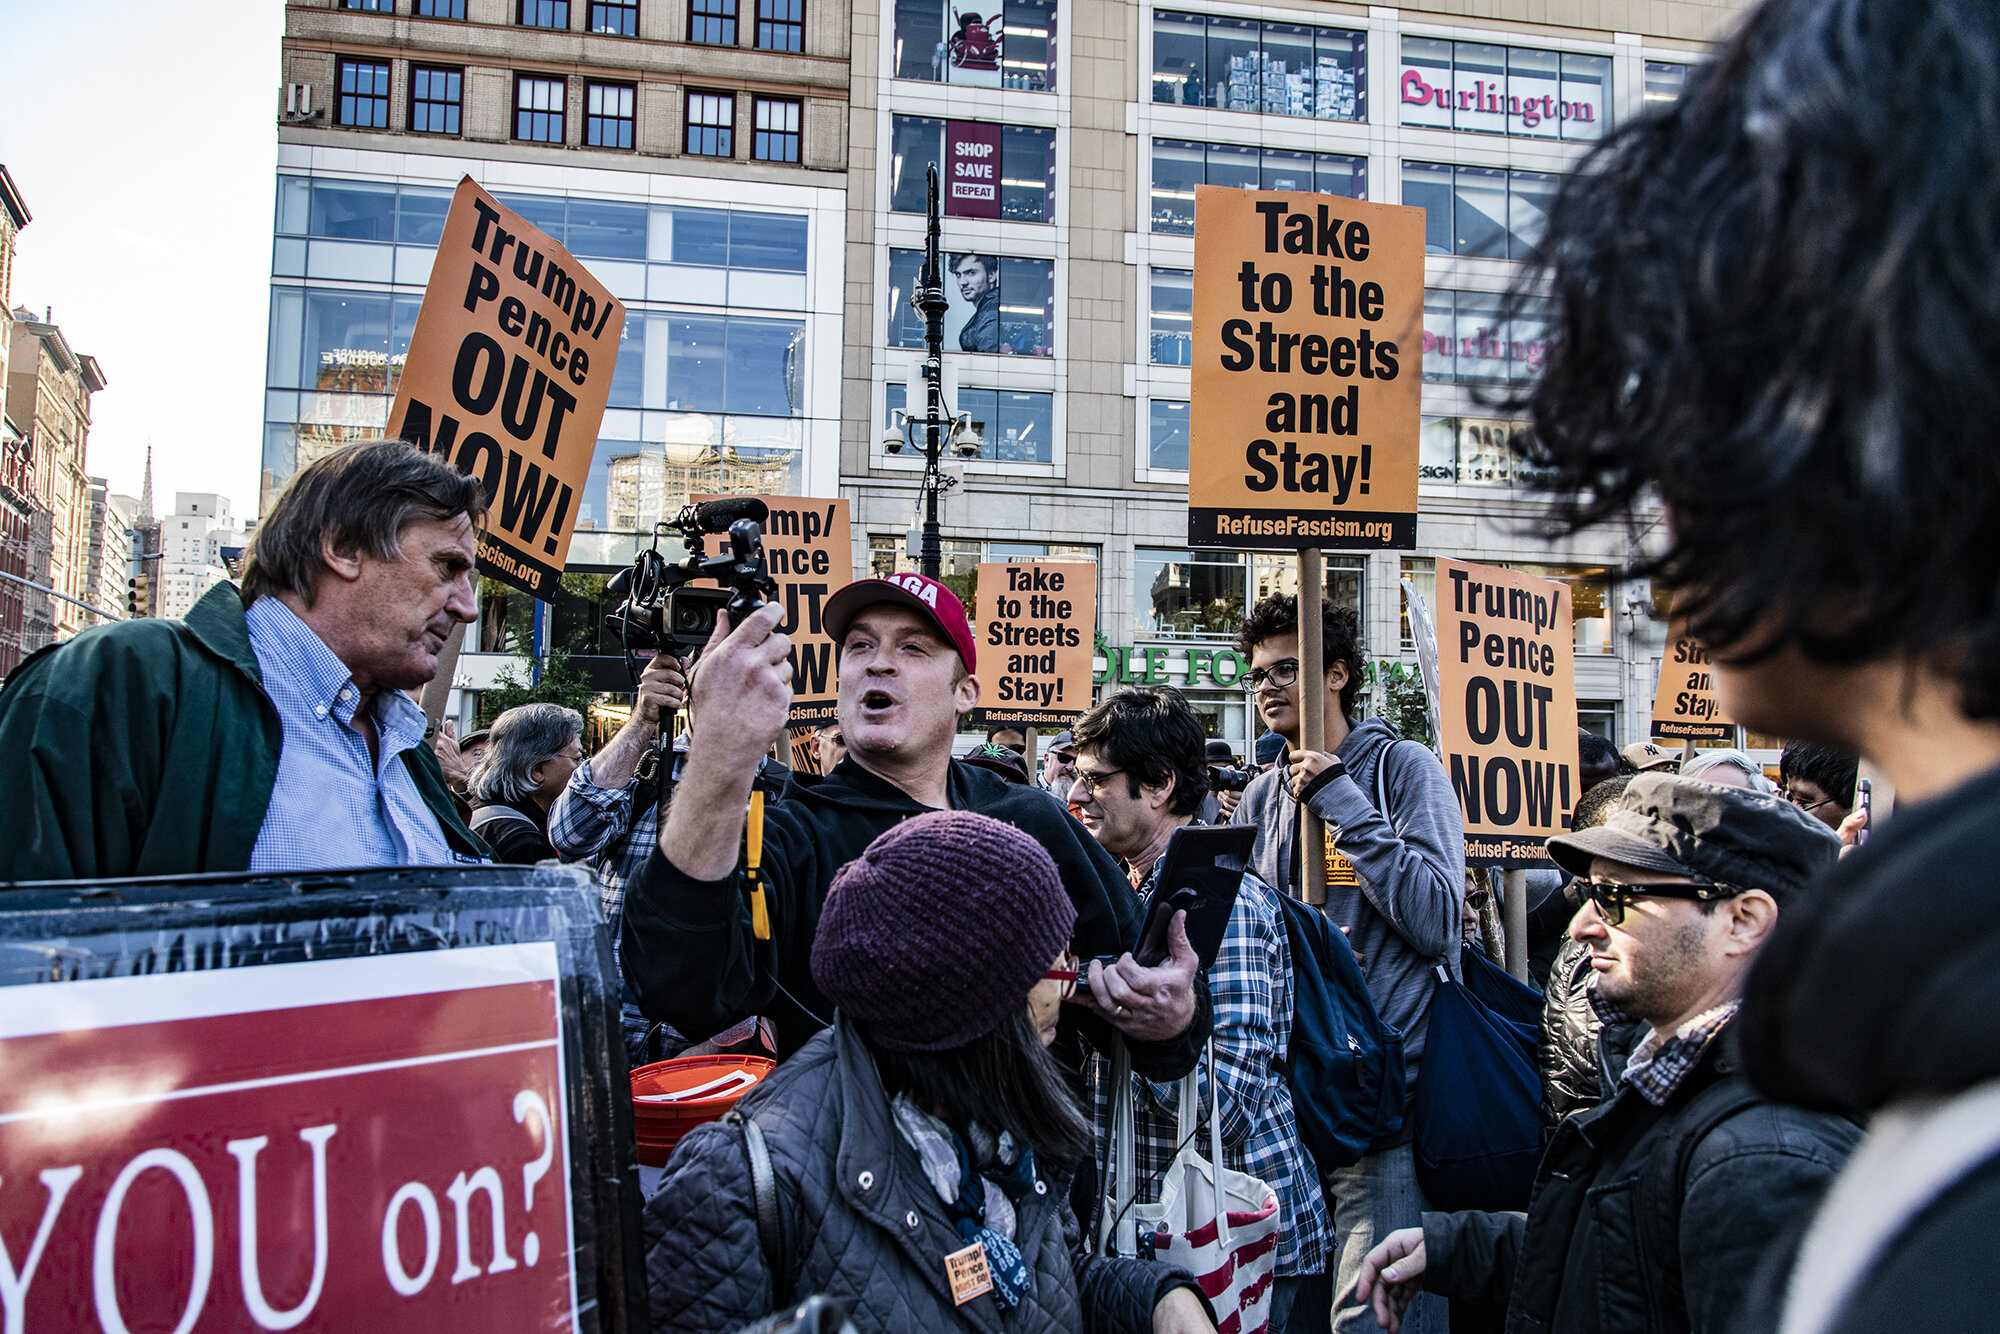 OUTNOW_Protest_2019_NYC-1614.jpg